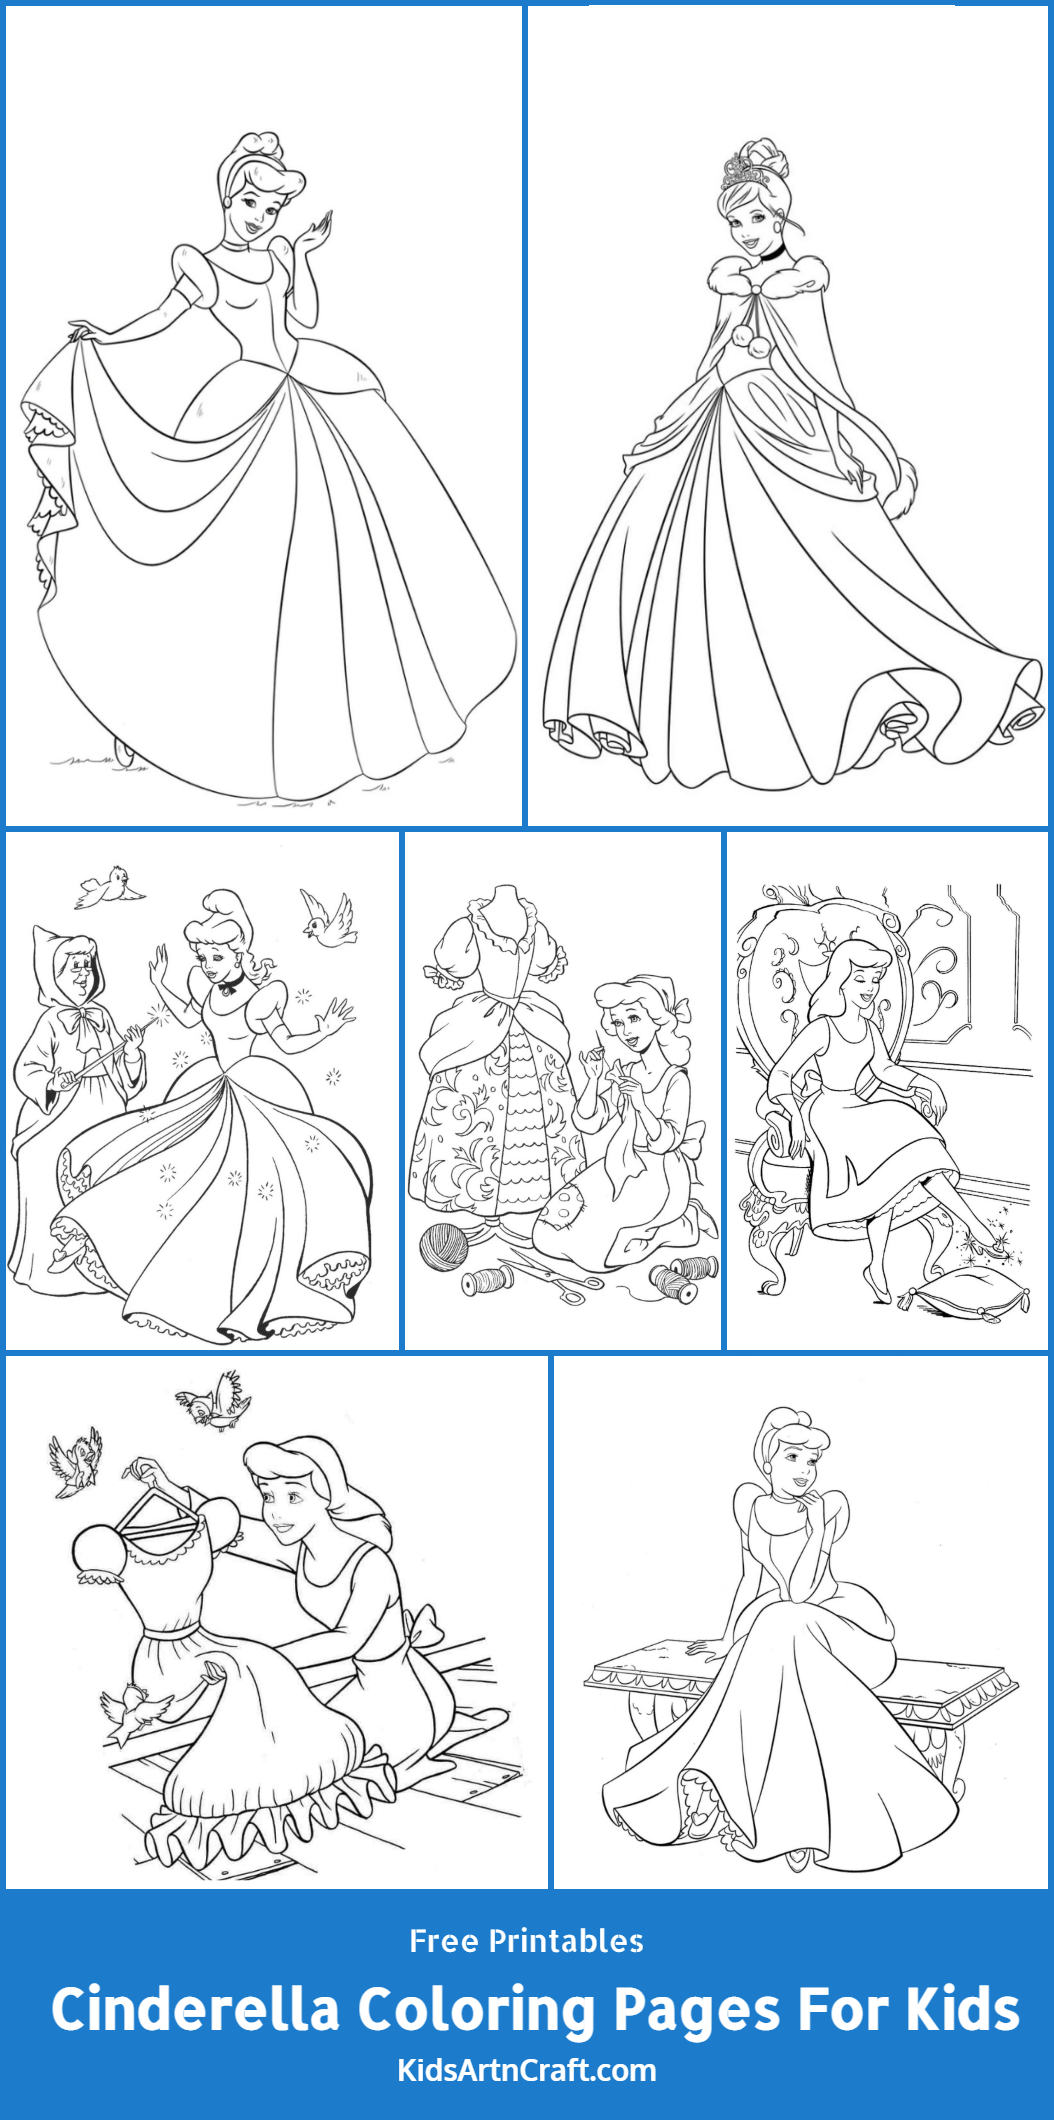 Cinderella Coloring Pages For Kids – Free Printables